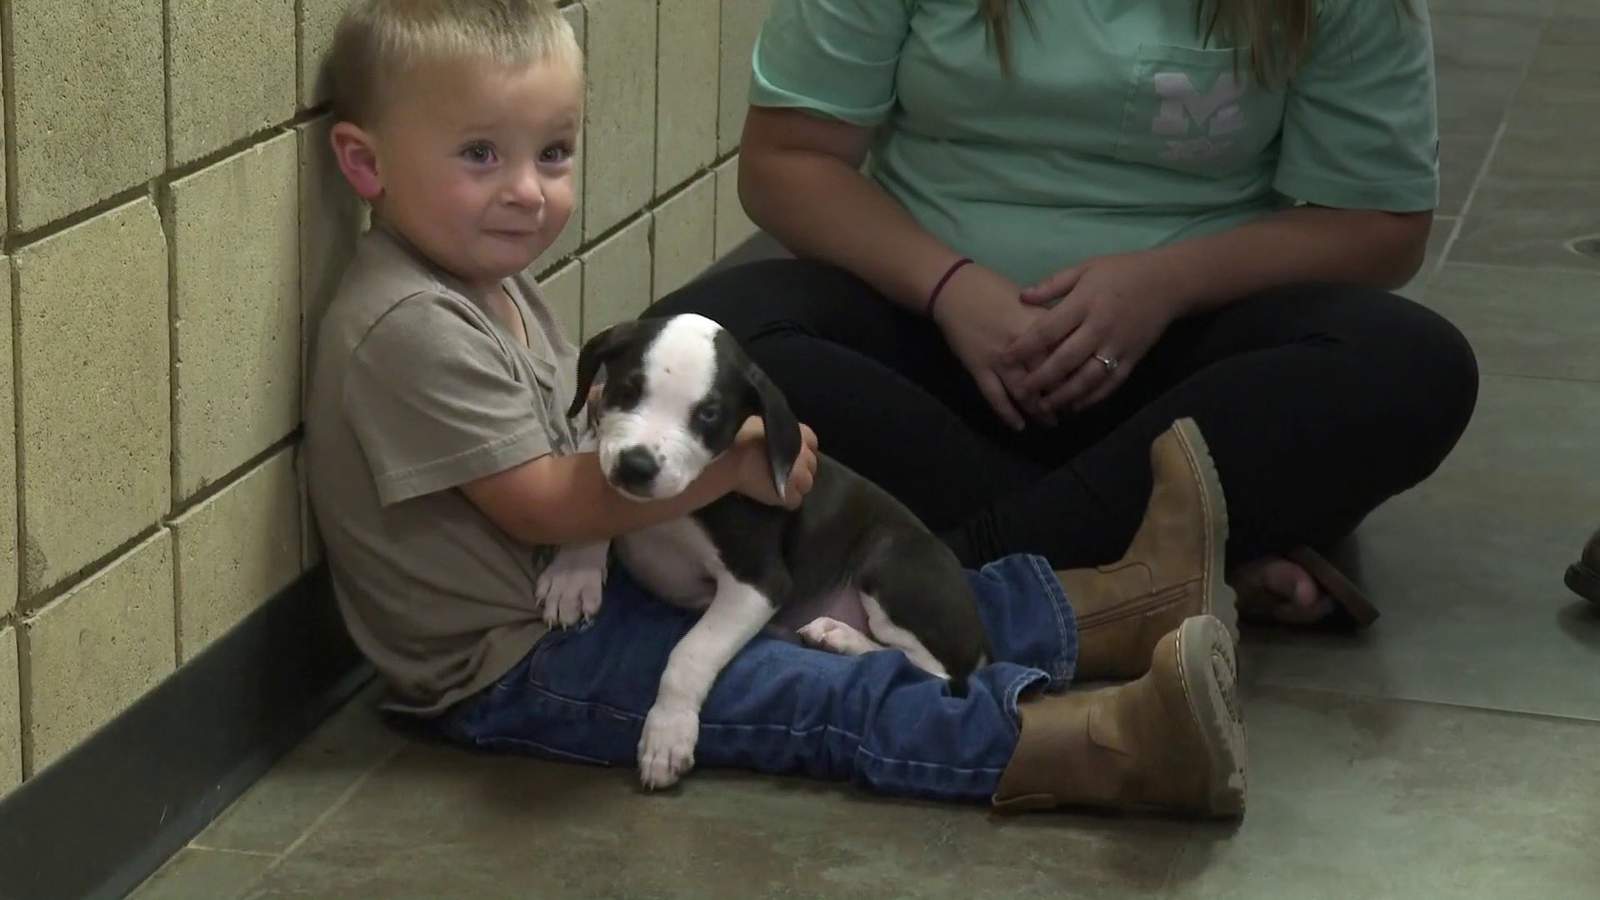 Puppy with cleft lip at Jackson animal shelter finds companion in boy with cleft lip